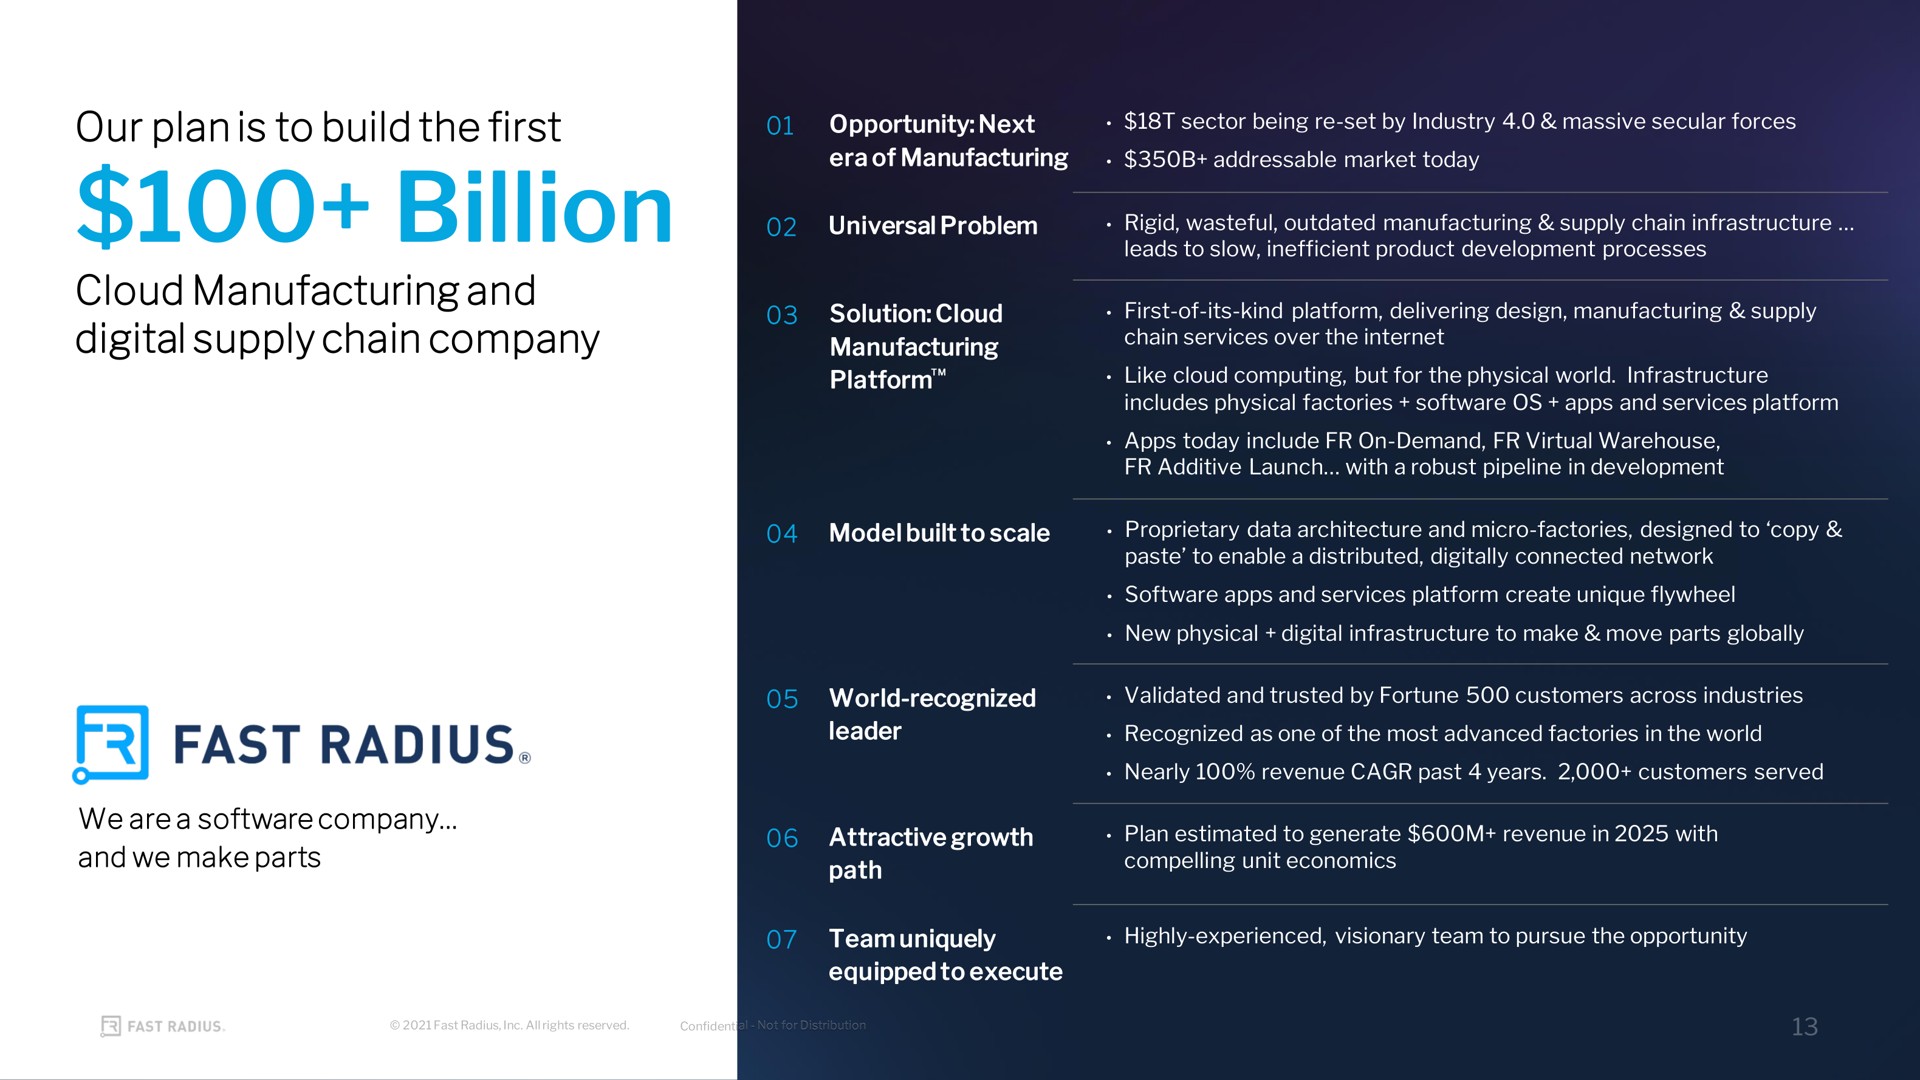 our plan is to build the first billion cloud manufacturing and digital supply chain company fast radius | Fast Radius